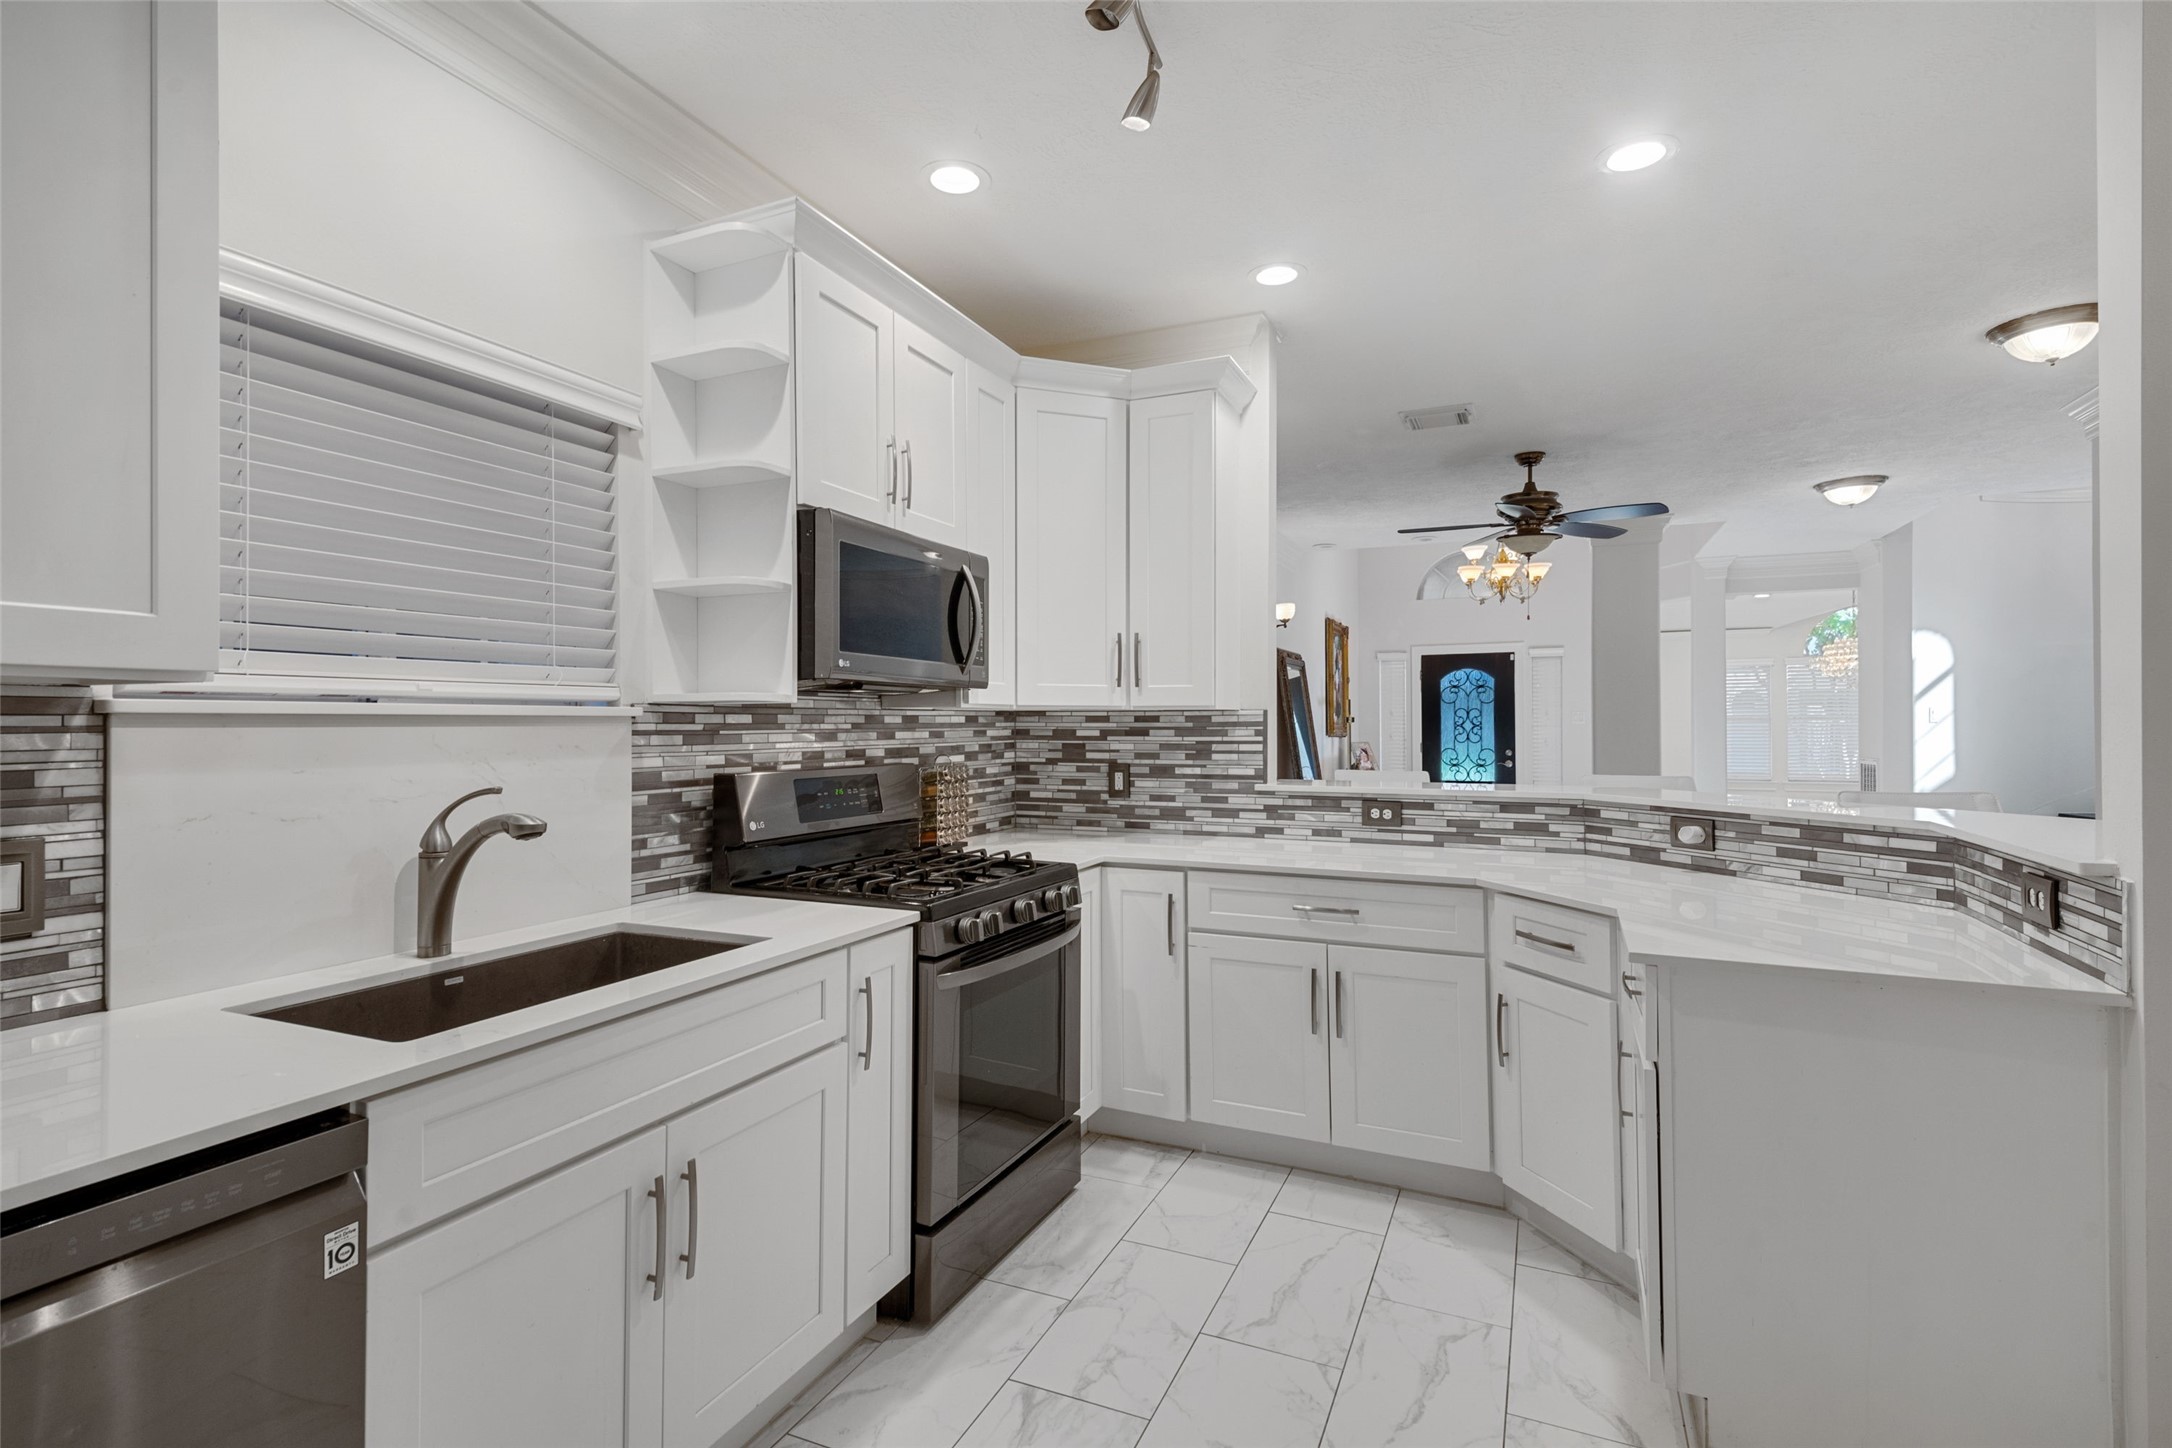 The kitchen is beautifully designed, with sleek quartz countertops, a back splash to complement the white cabinetry and black stainless steel appliances.